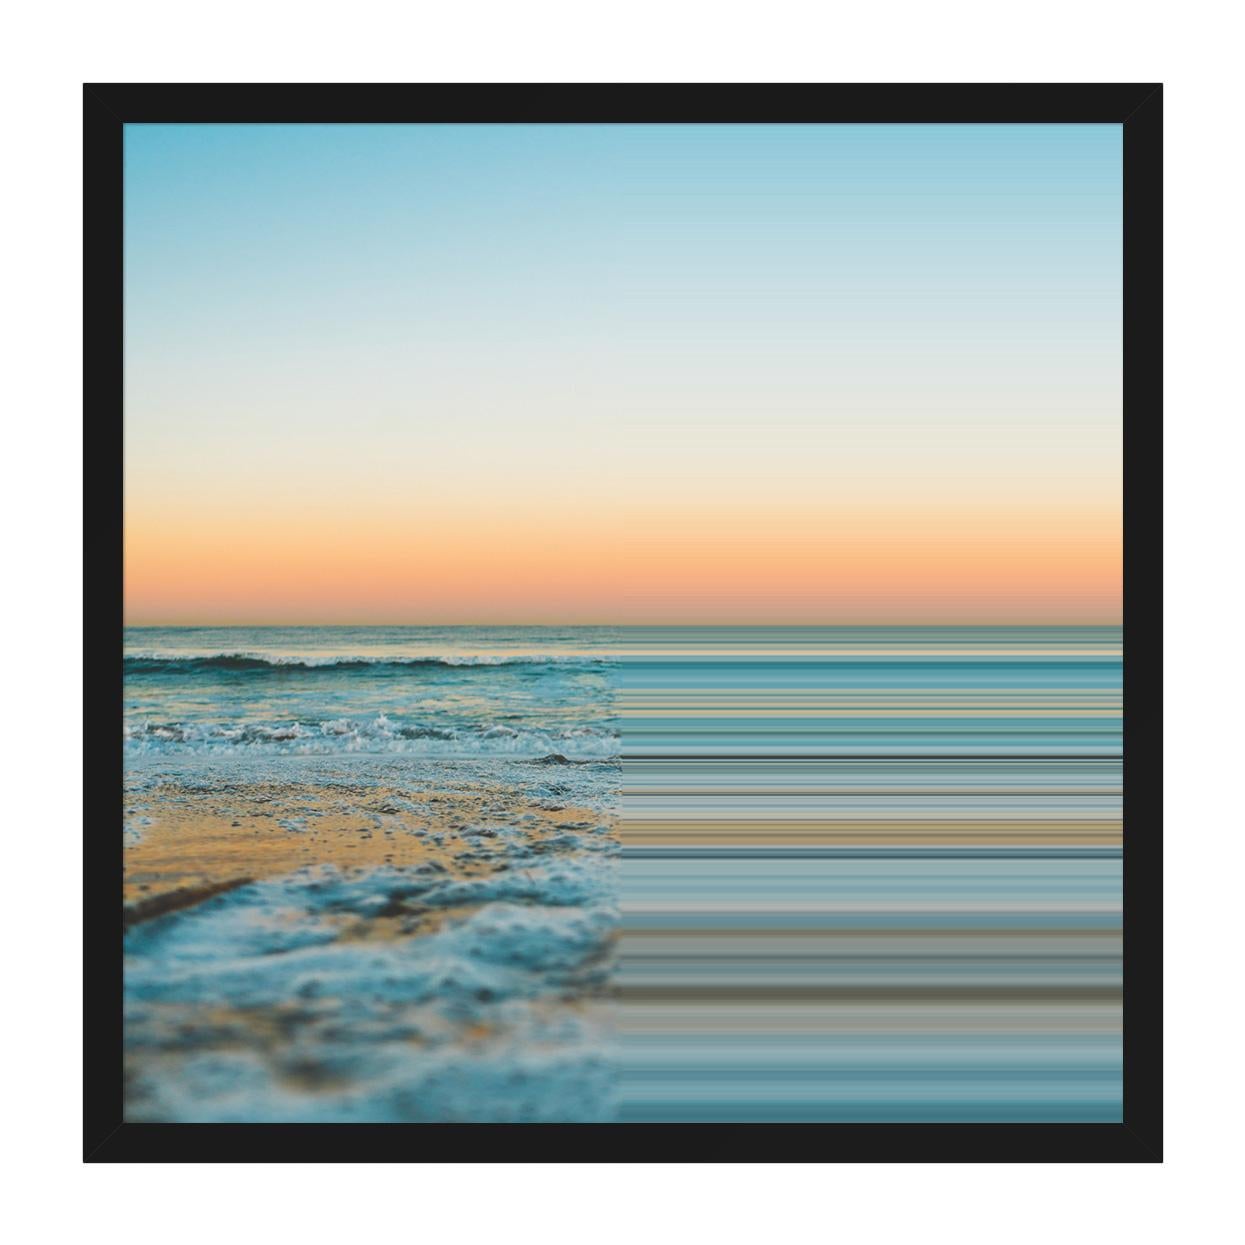 THIS PIECE IS AVAILABLE FRAMED.  Please reach out to the gallery for more information.

ABOUT THIS ARTIST: Niall Staines is a digital artist based in Ireland. His work is graphic, vibrant and visually arresting. Nature is a consistent theme in his